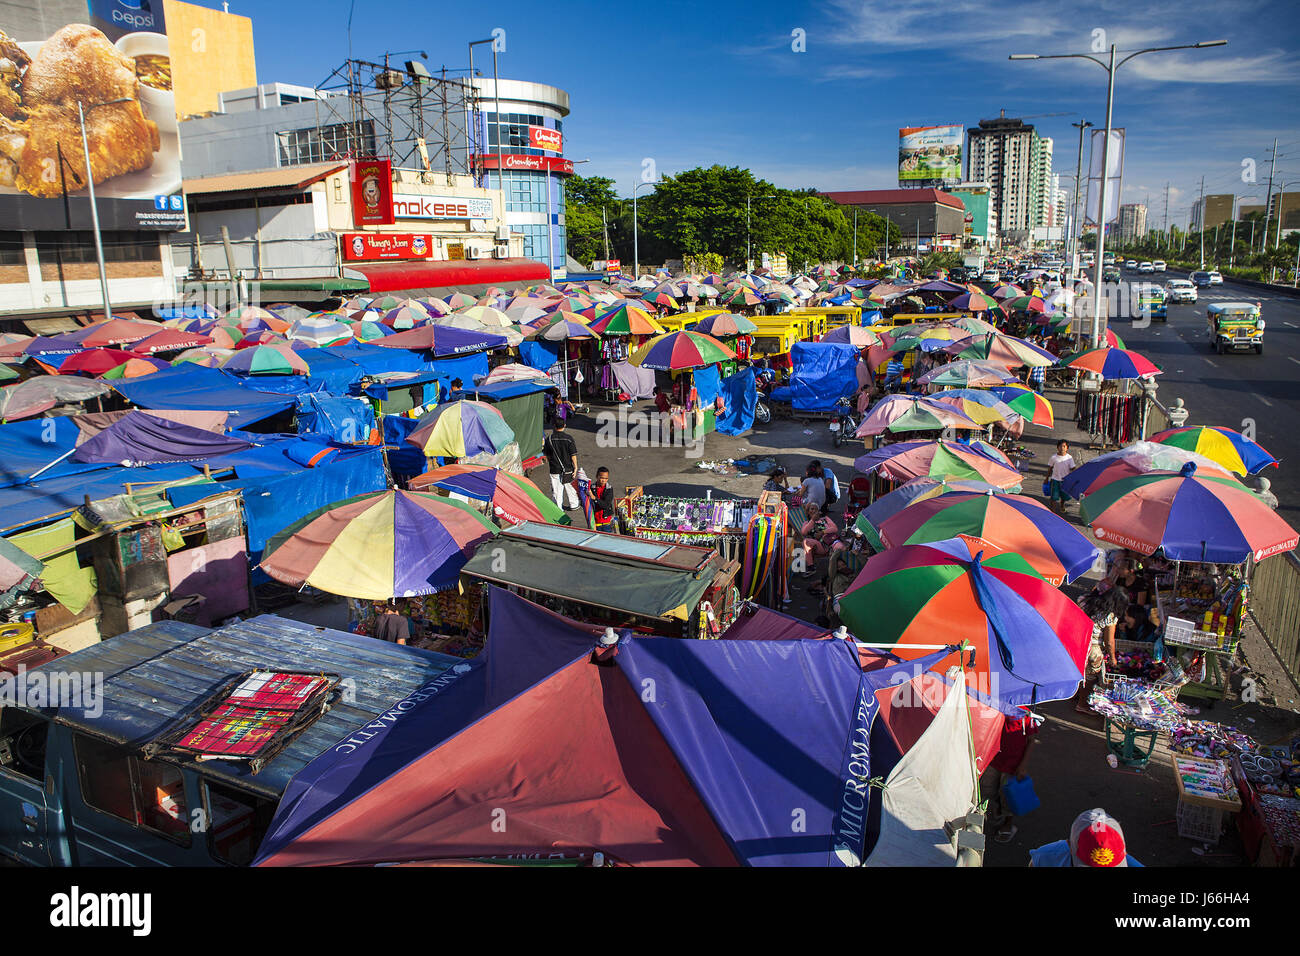 Hundreds of colorful umbrellas shade vendors in the huge outdoor marketplace in Baclaran, Manila, Luzon Island, Philippines. Stock Photo